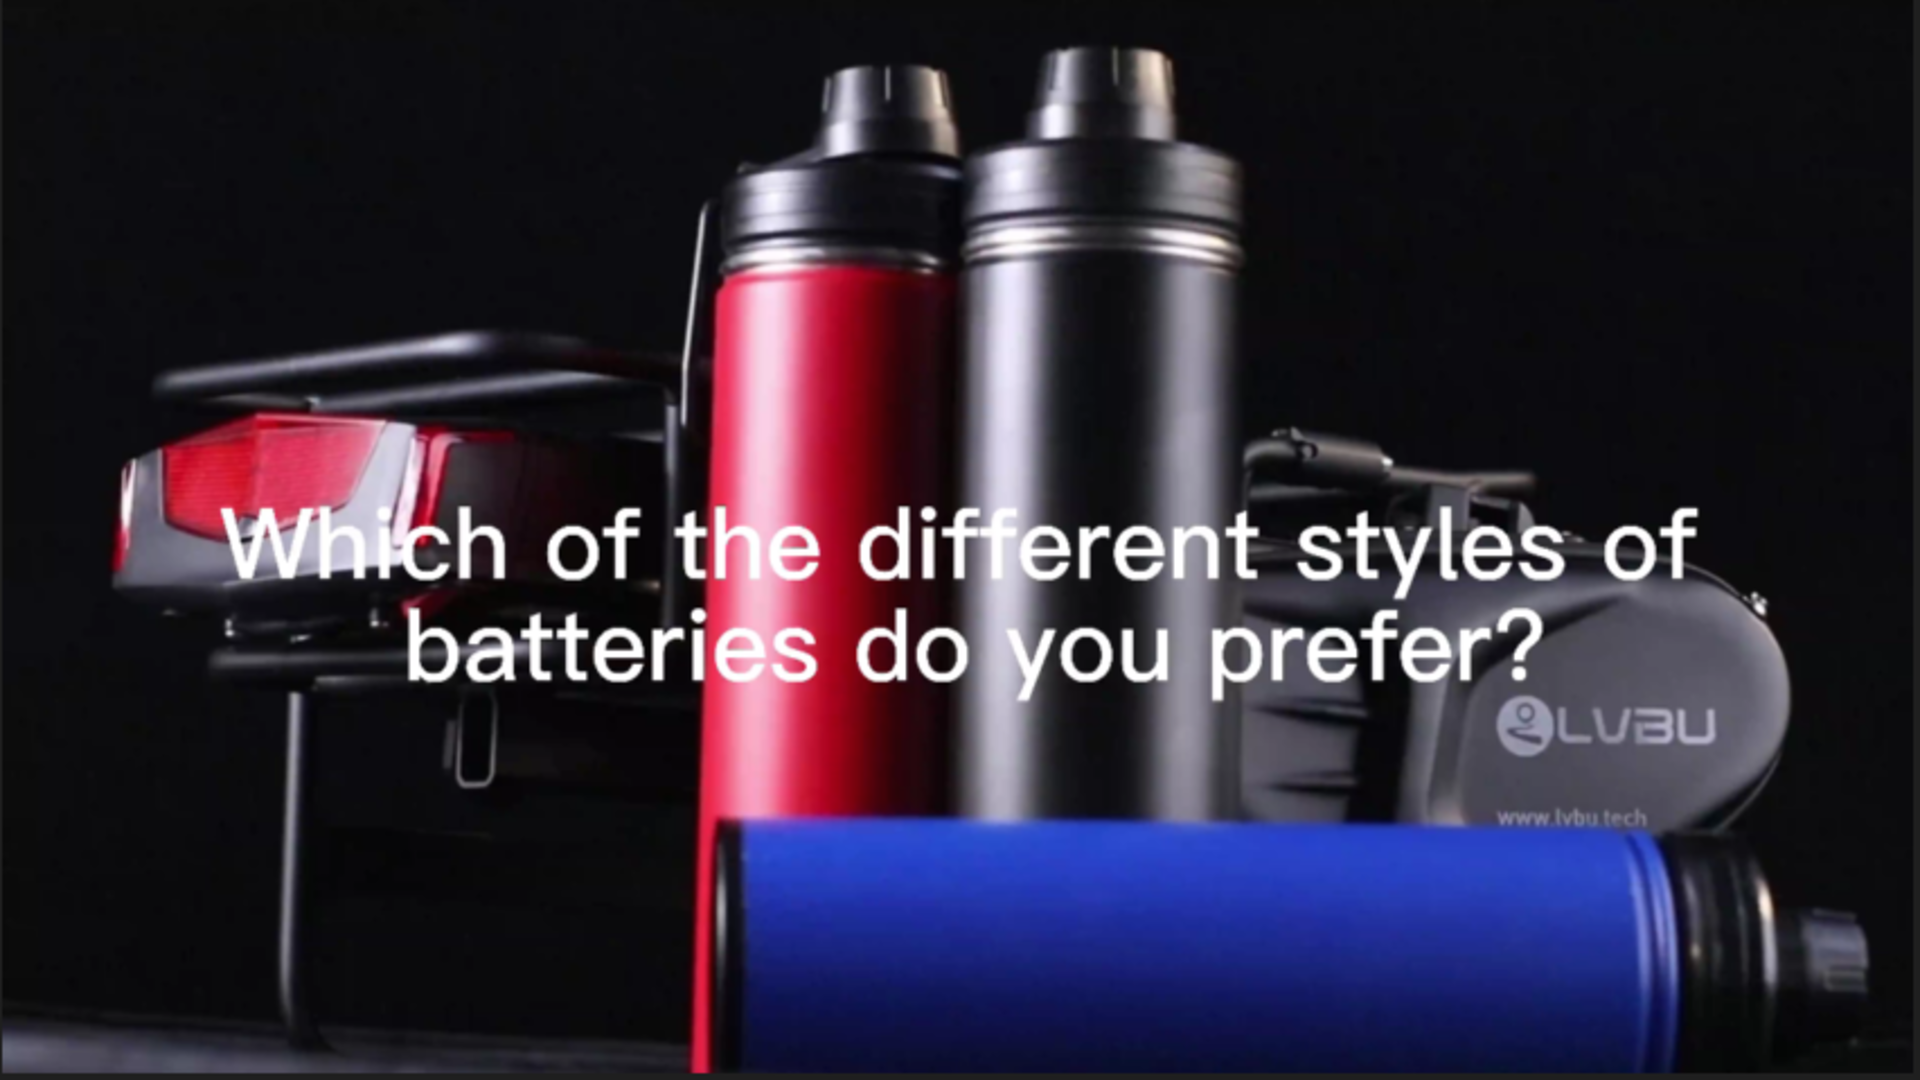 Which of th different styles of batteries do you prefer?